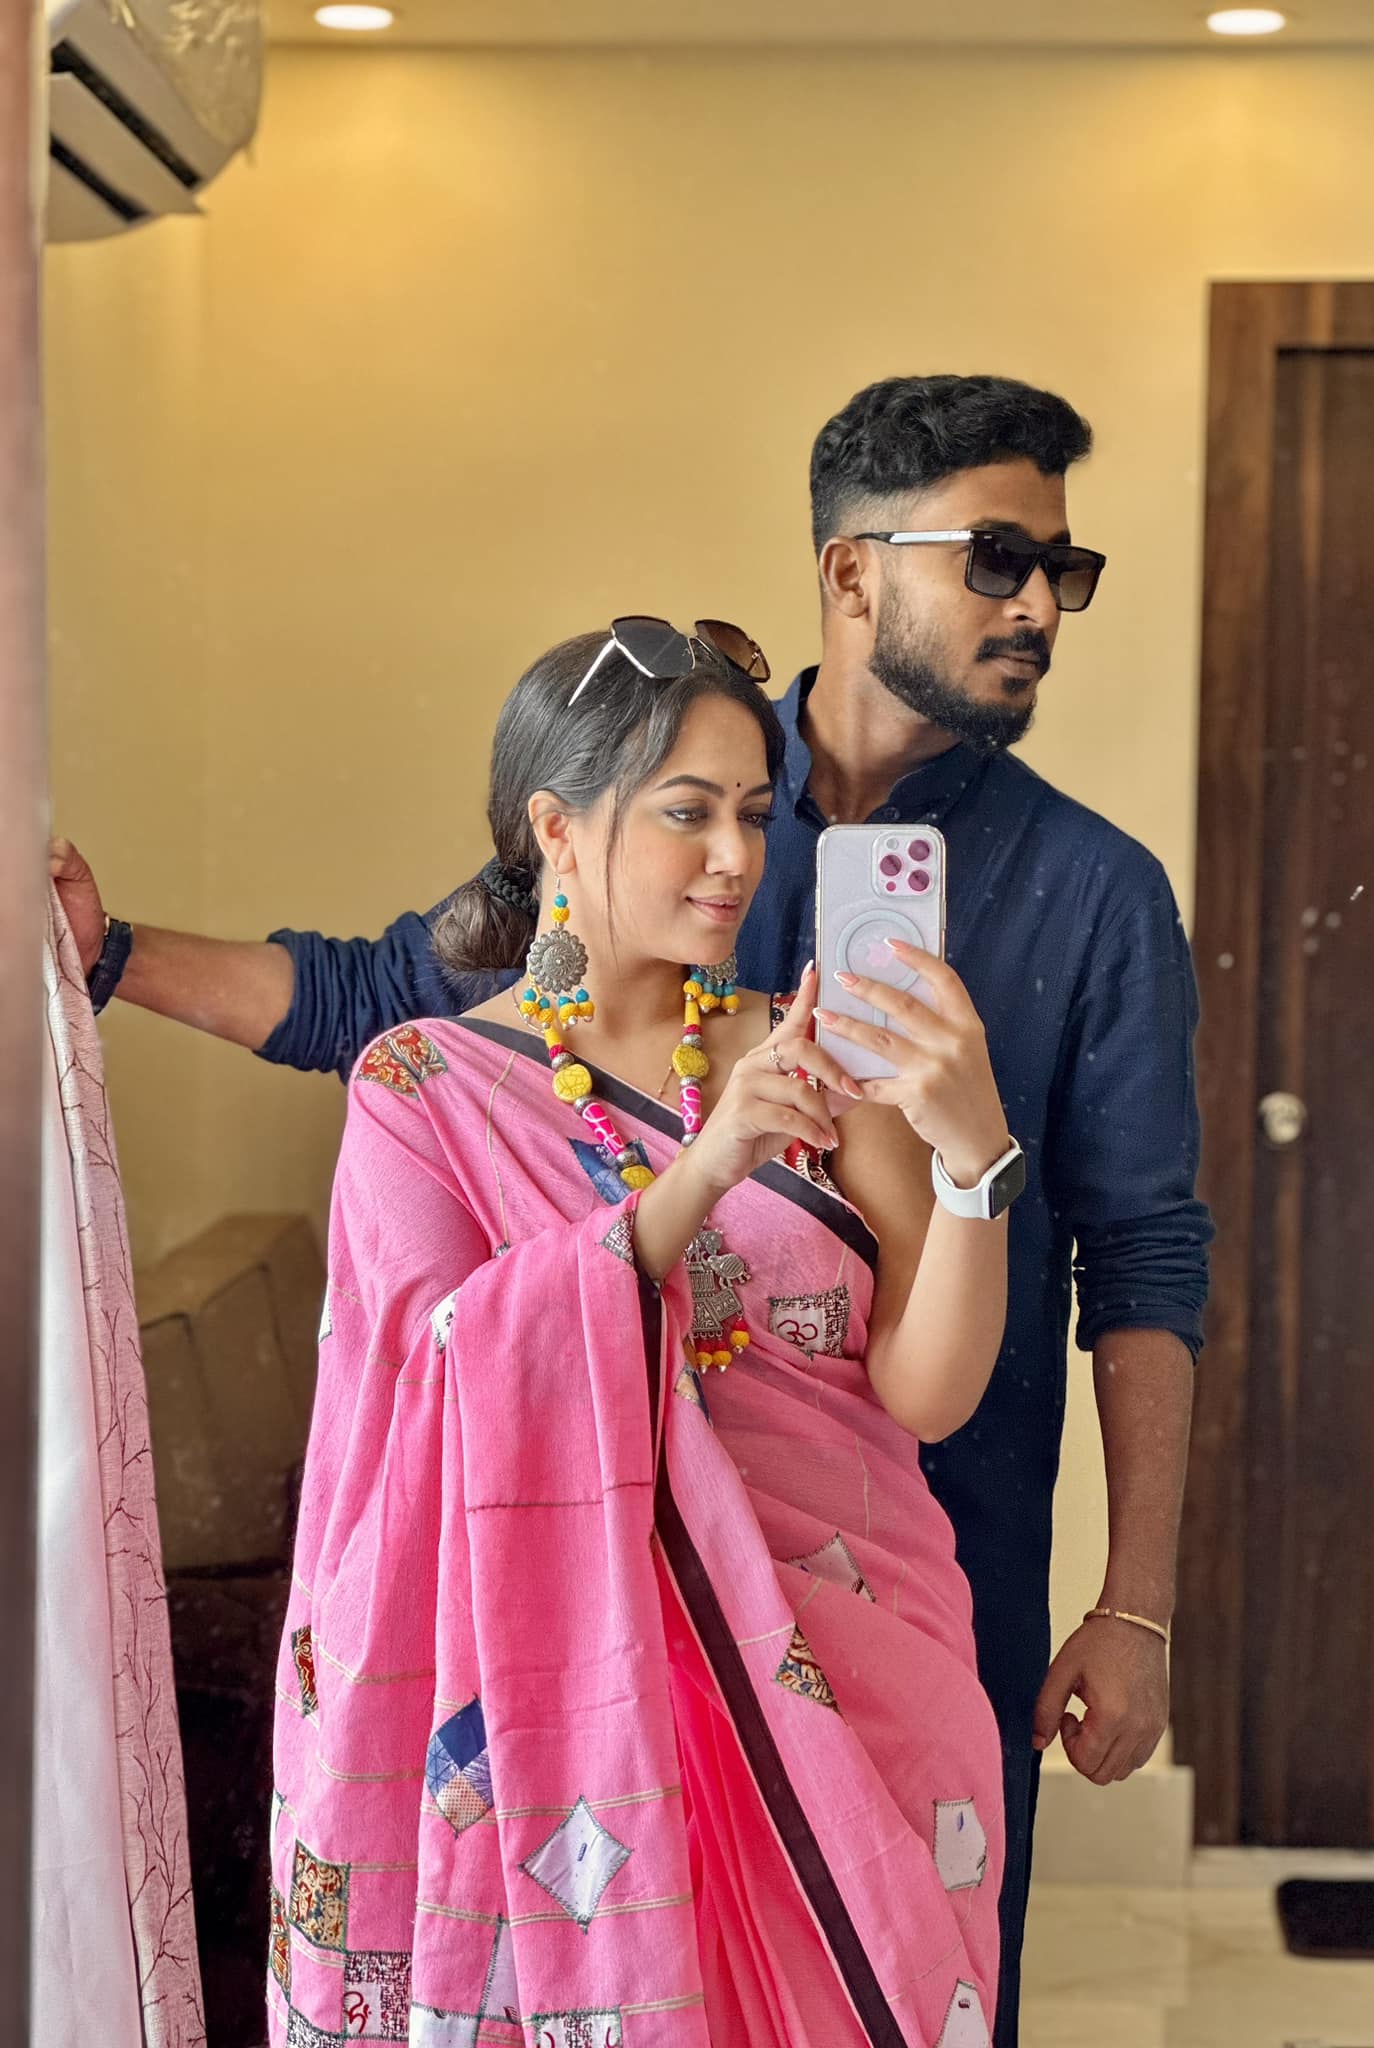 Anurager Chhowa serial Mishka actress Ahona Dutta shares another romantic picture with boyfriend Dipankar